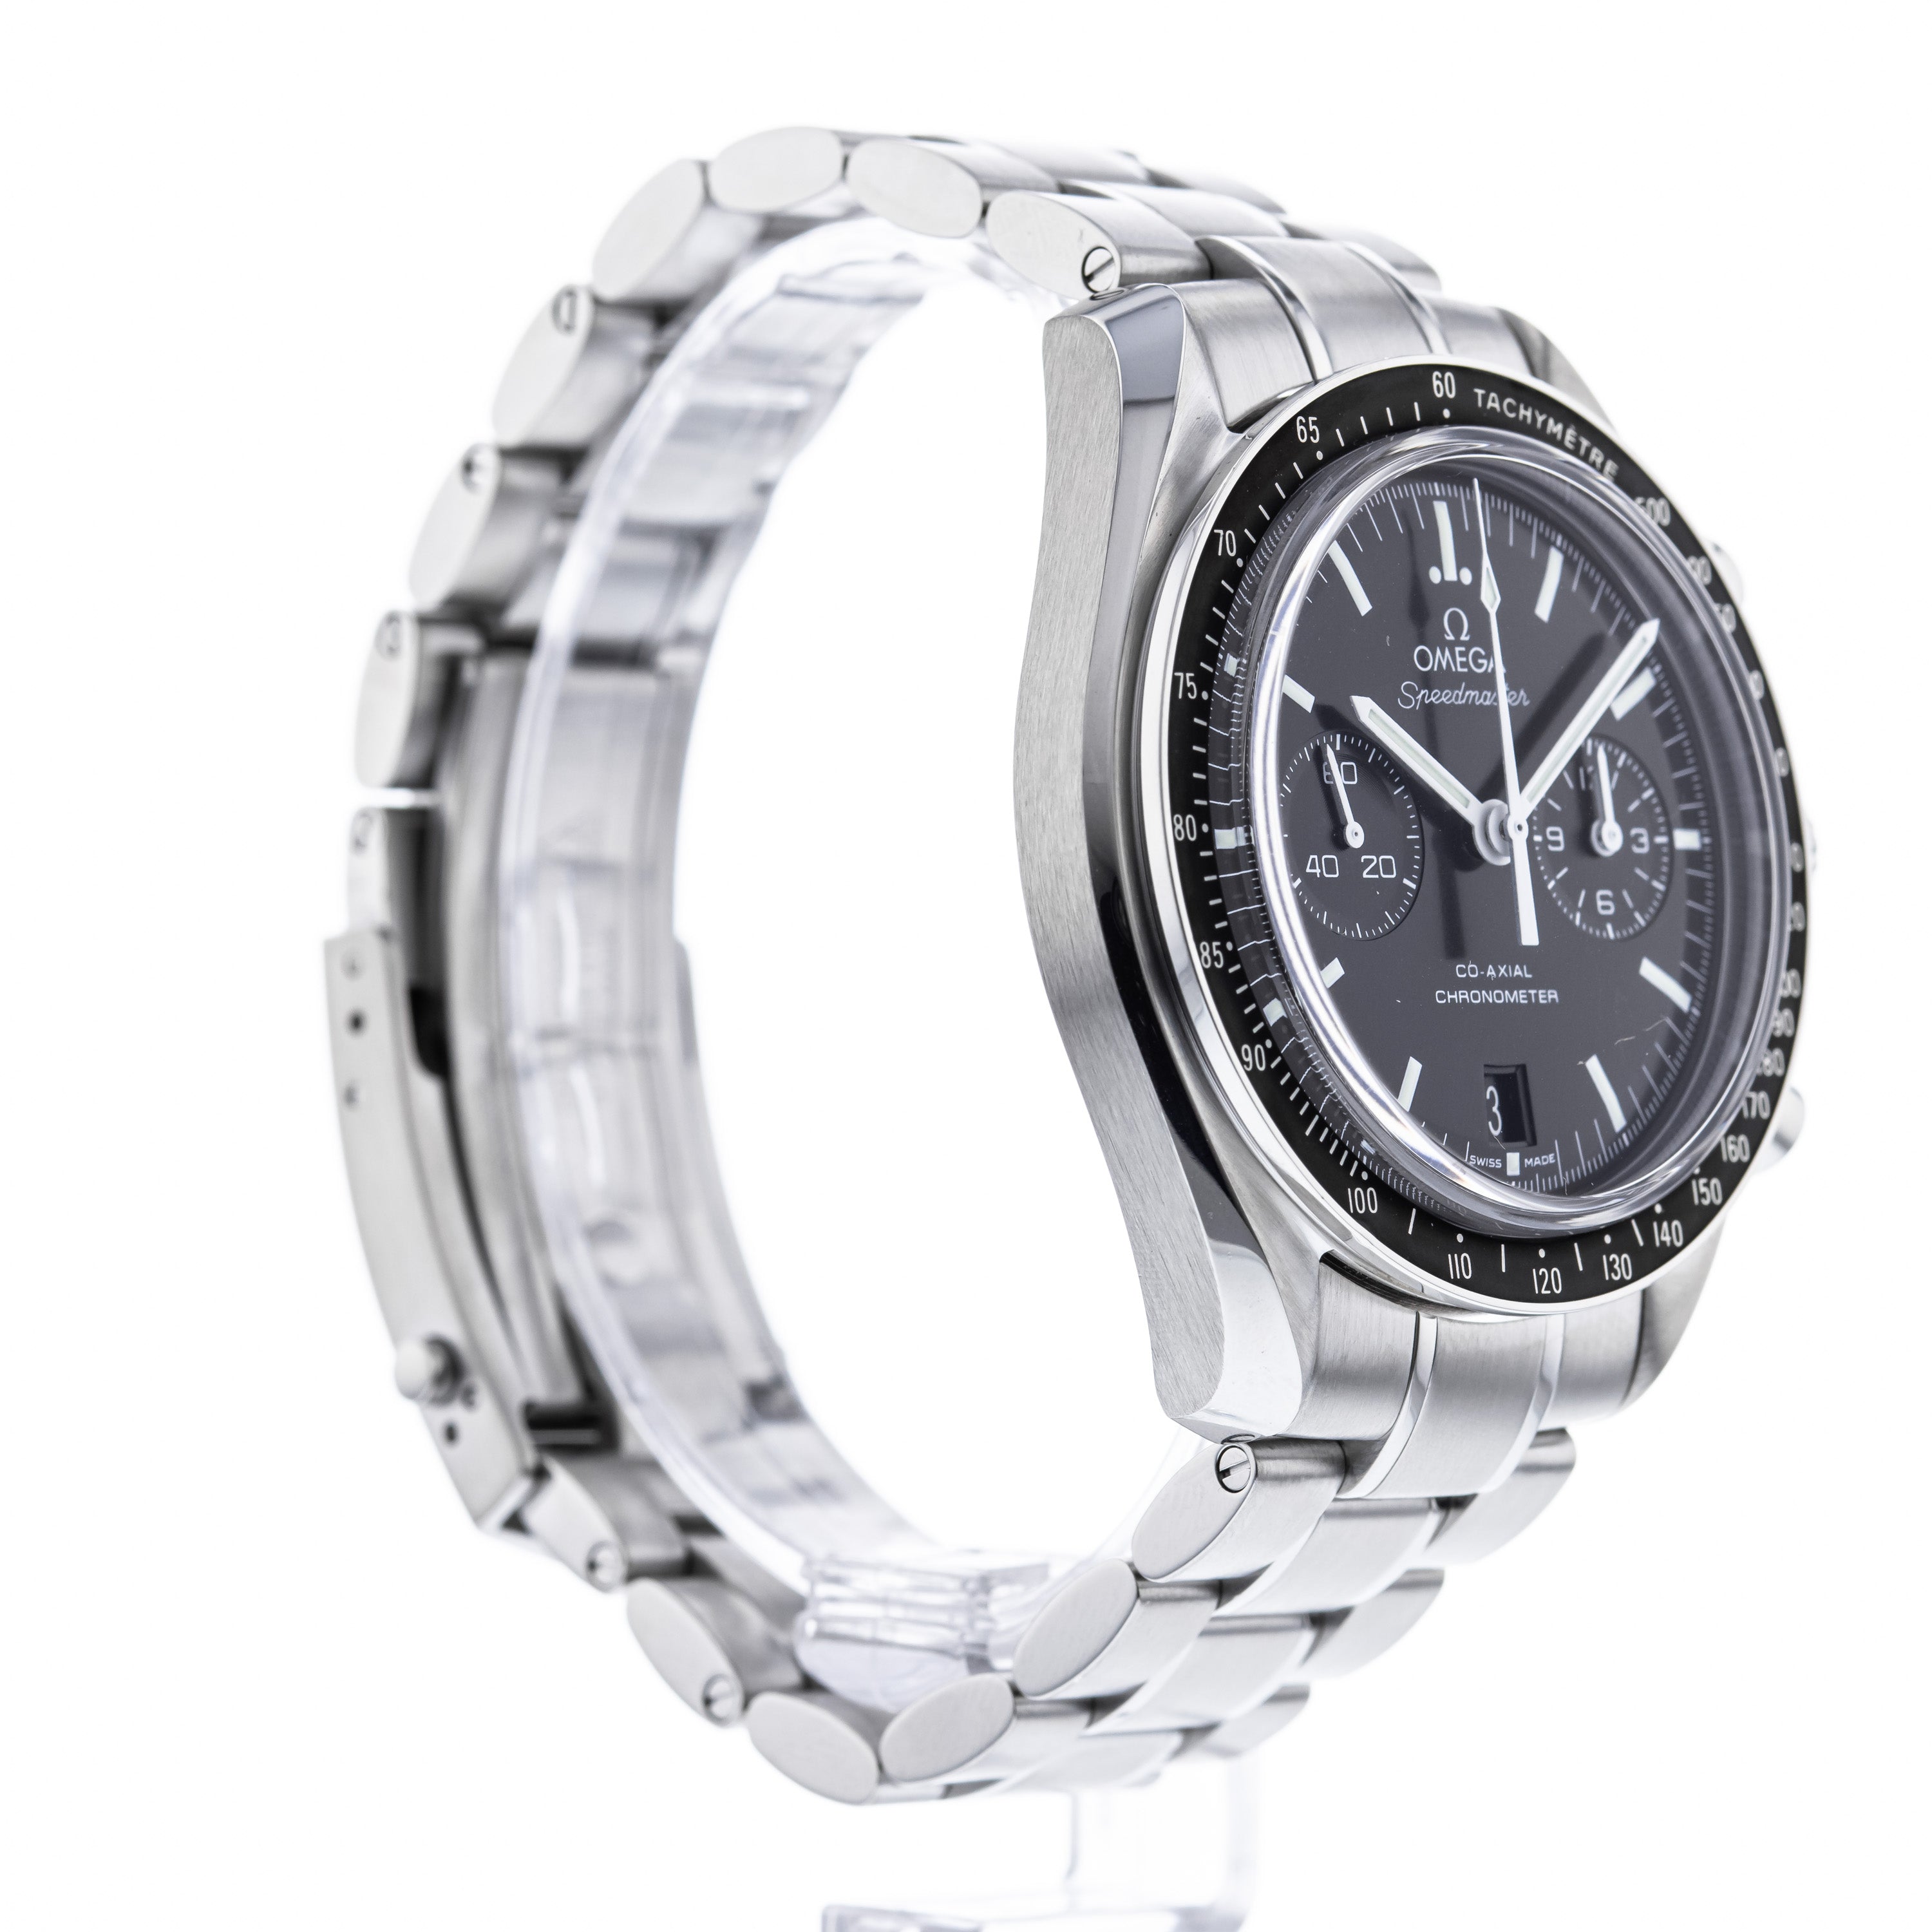 OMEGA Speedmaster Moonwatch Co-Axial Chronograph 311.30.44.51.01.002